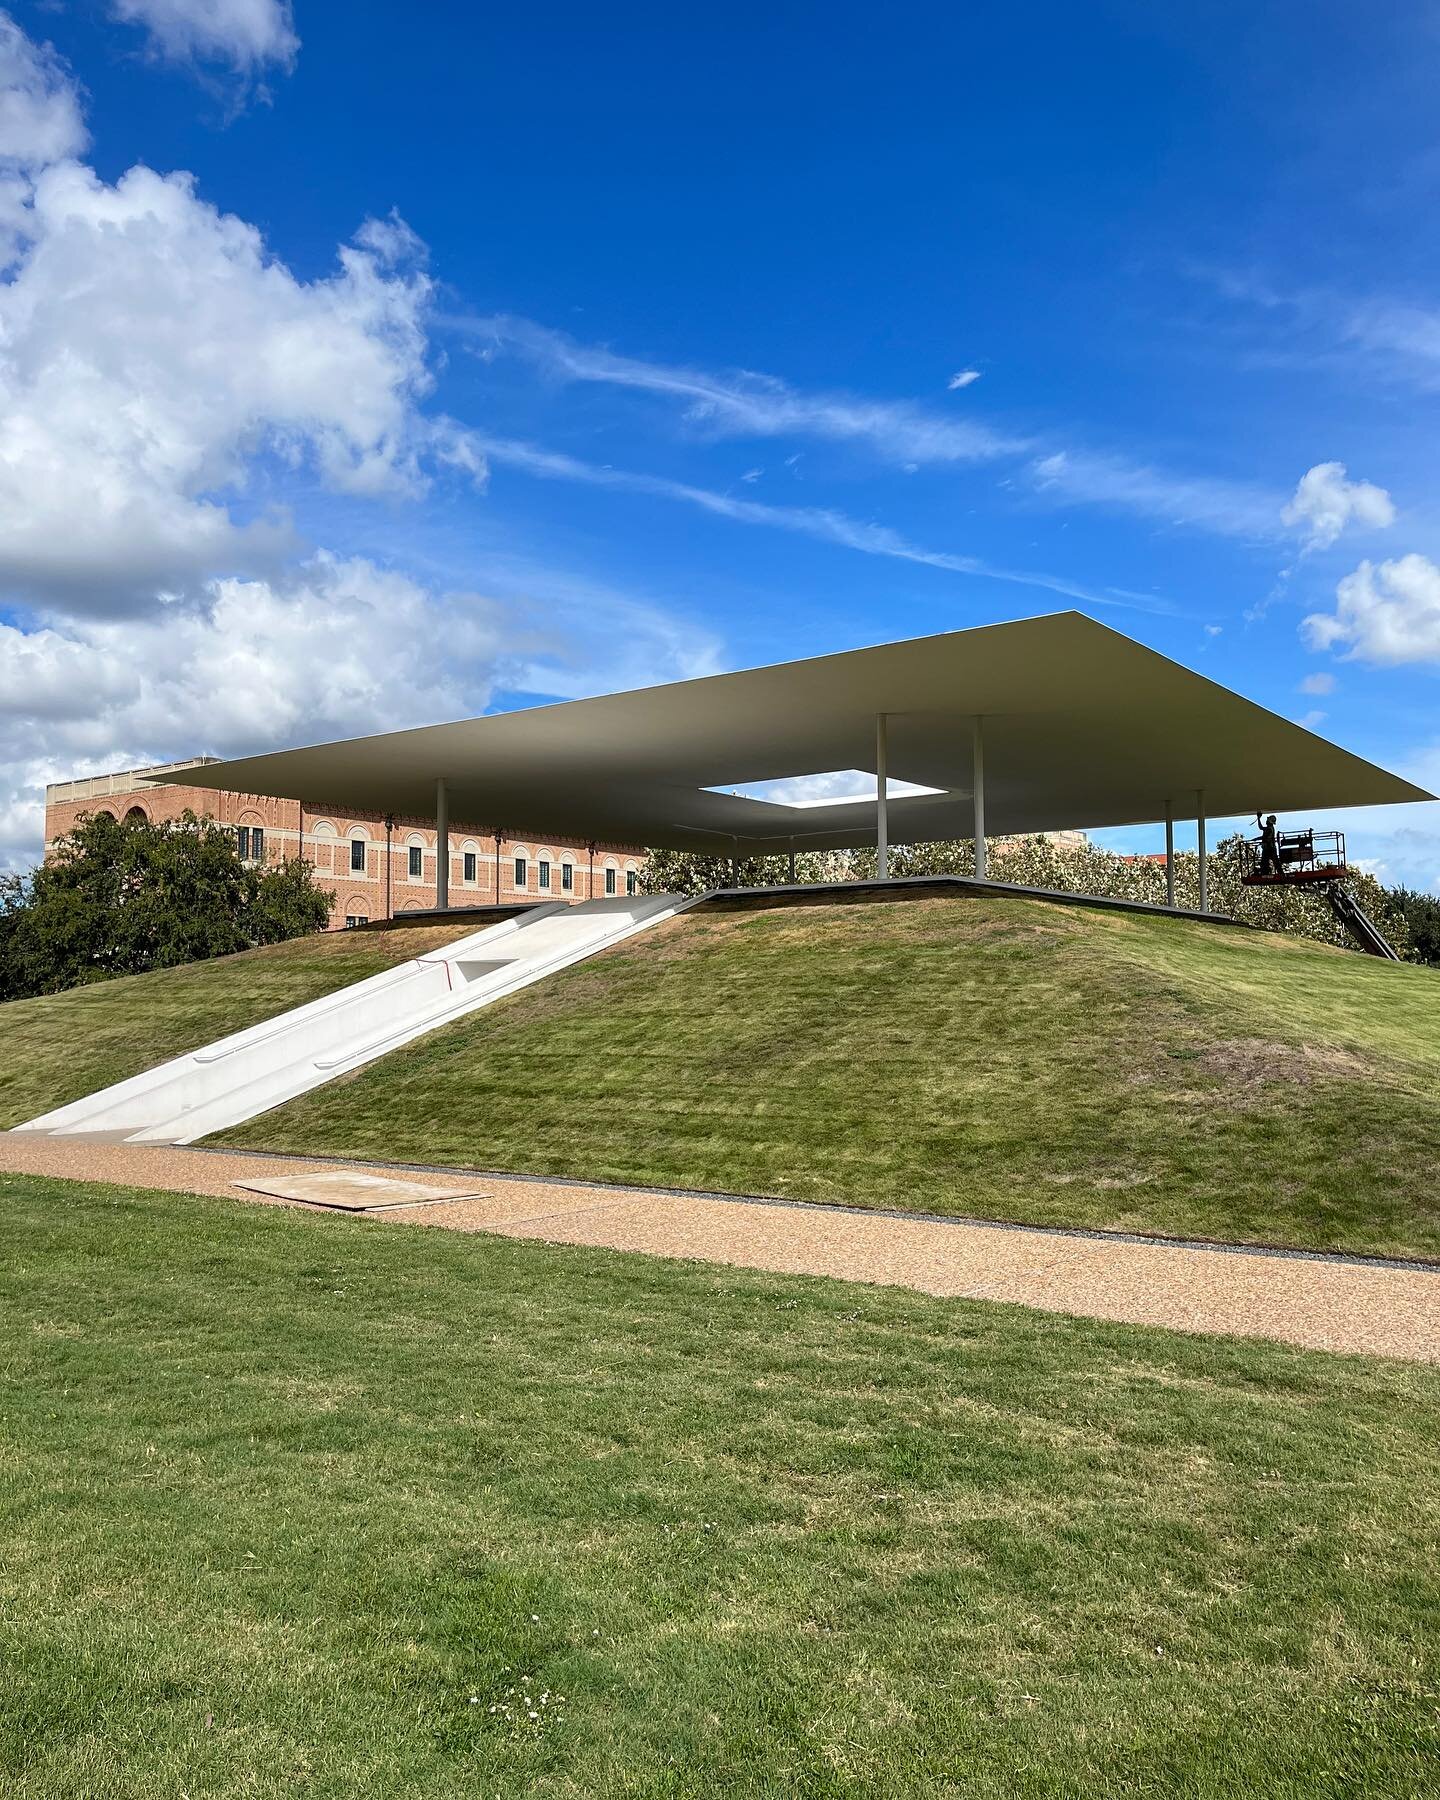 Wonderful visit to the Moody Center for the Arts at Rice University in Houston, Texas. highlights include James Turrell &ldquo;Twilight Epiphany&rdquo; 2023, Mark di Suvero &ldquo;Lyric&rdquo; 2003 and Laure Prouvost &quot;Above Front Tears Oui Nest 